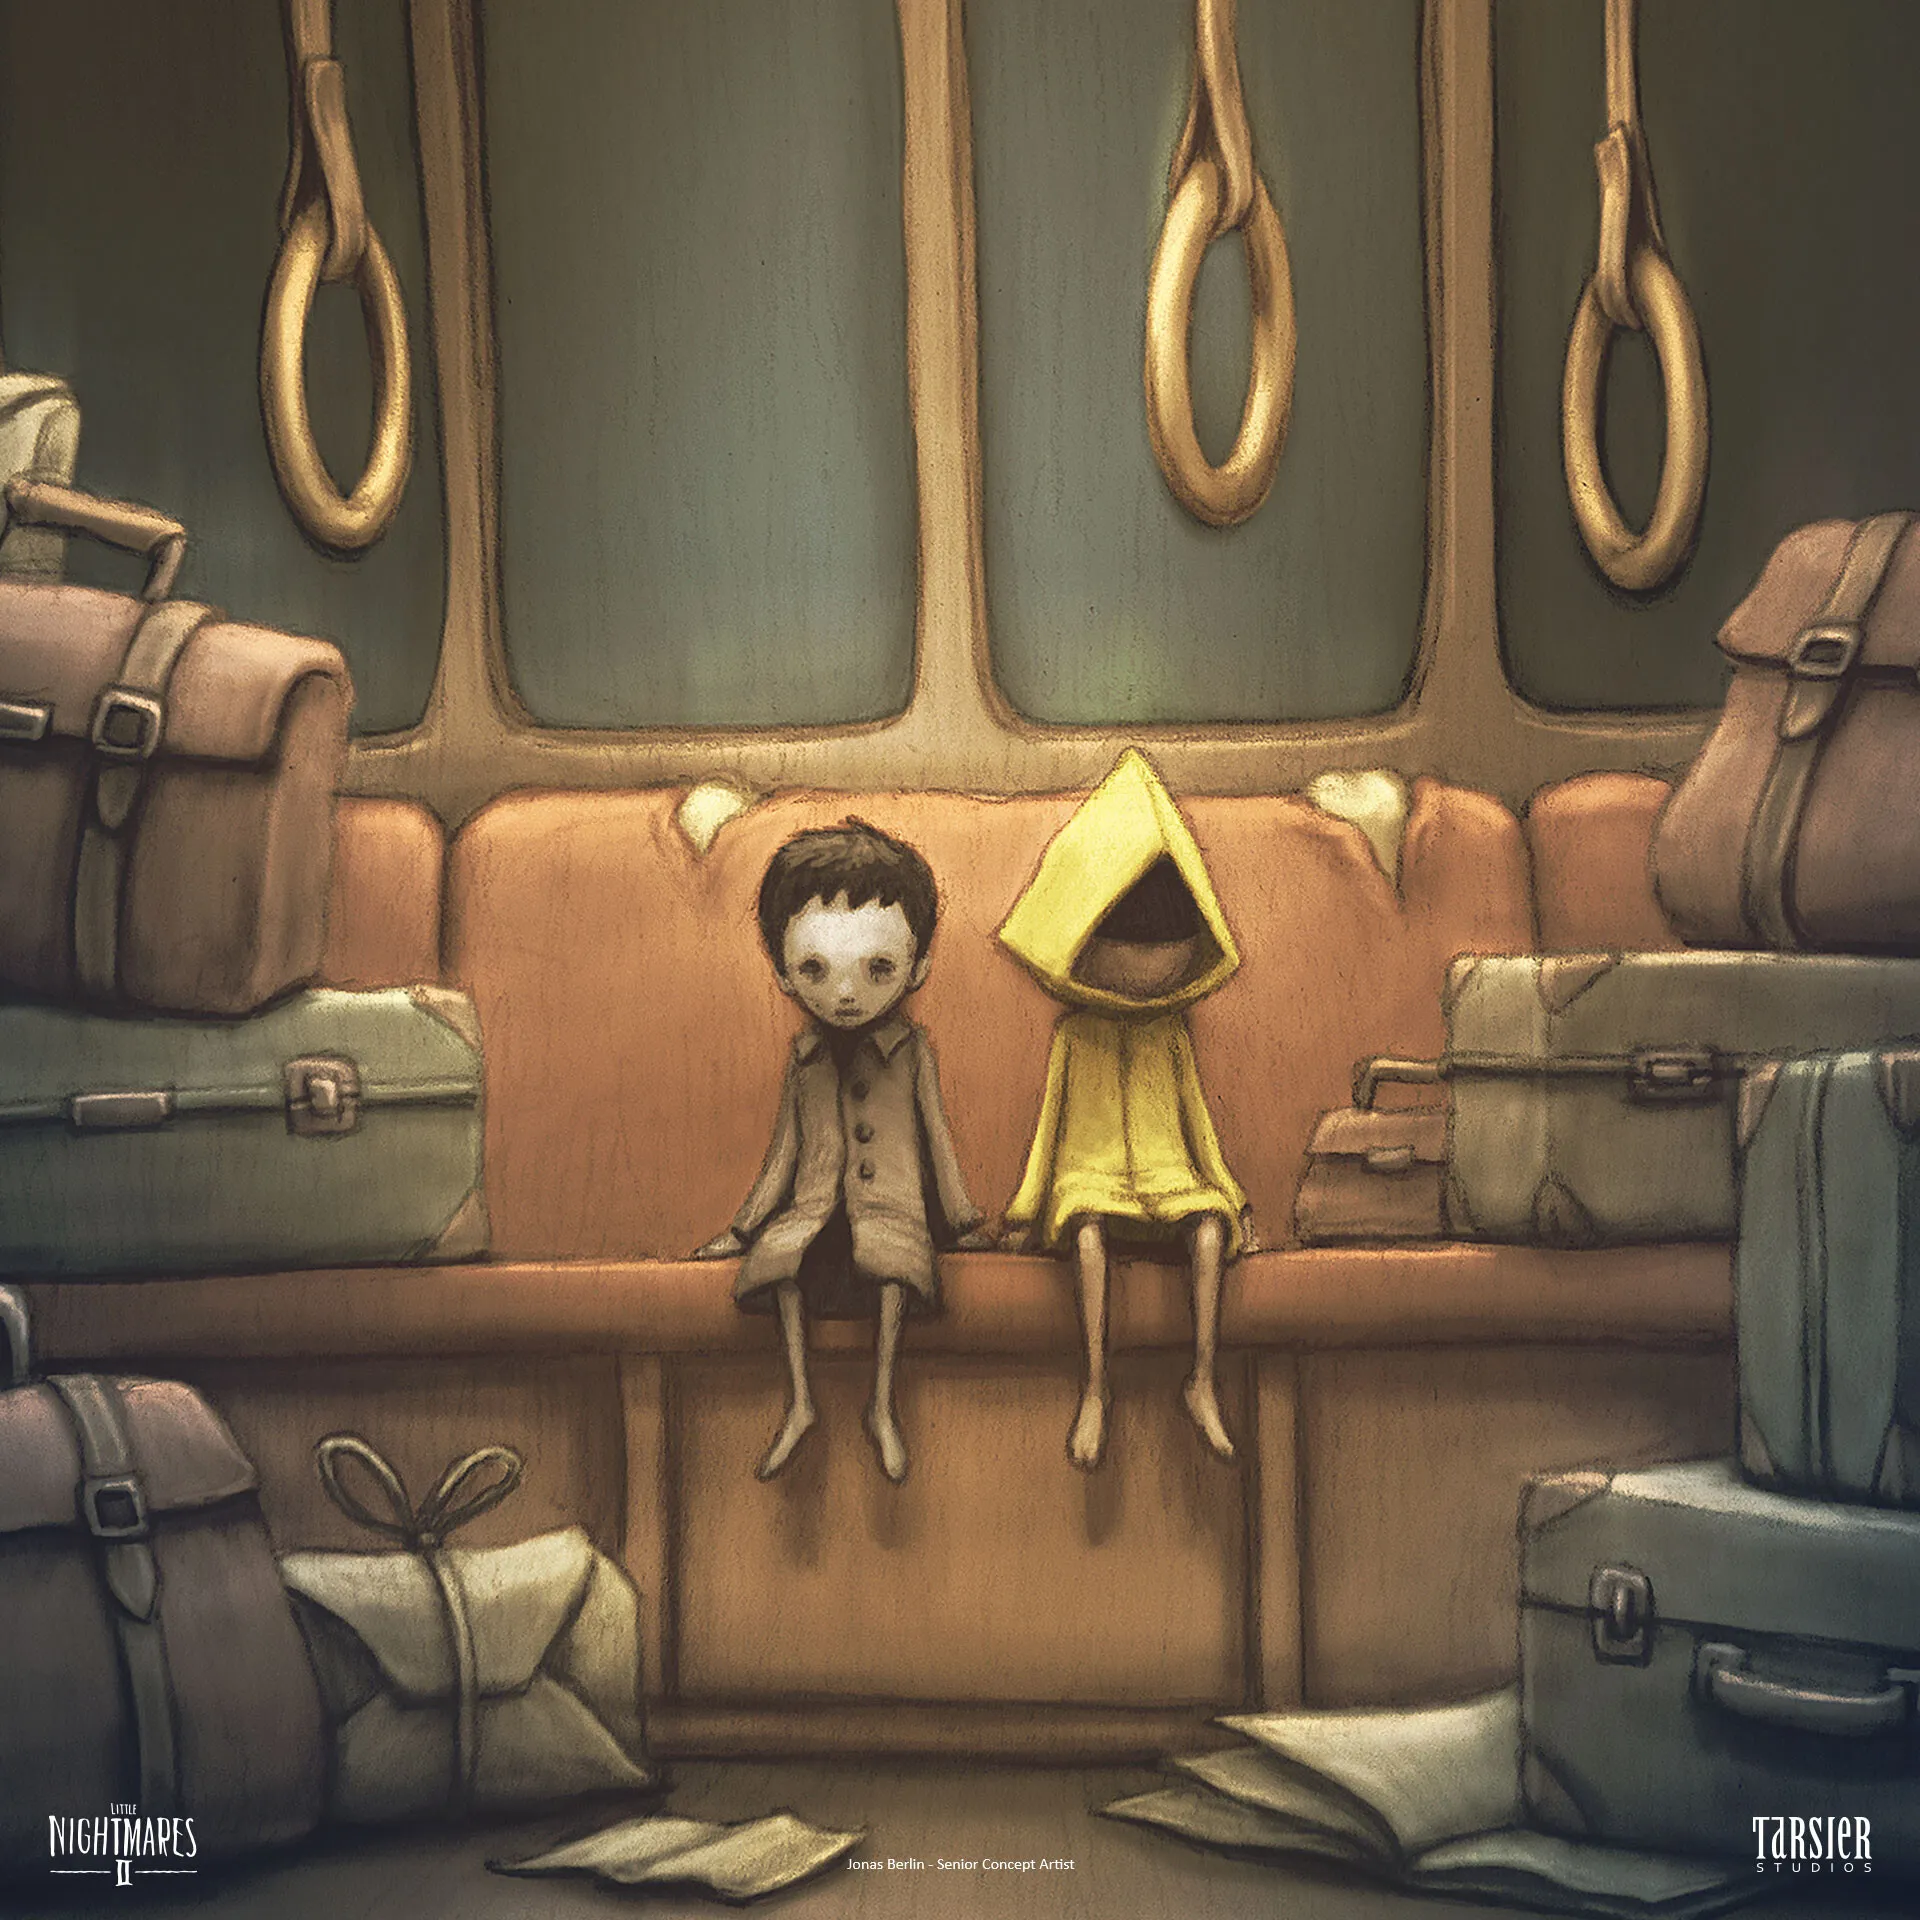 Barber as a game model from Little nightmares 2 artbook. : r/ LittleNightmares